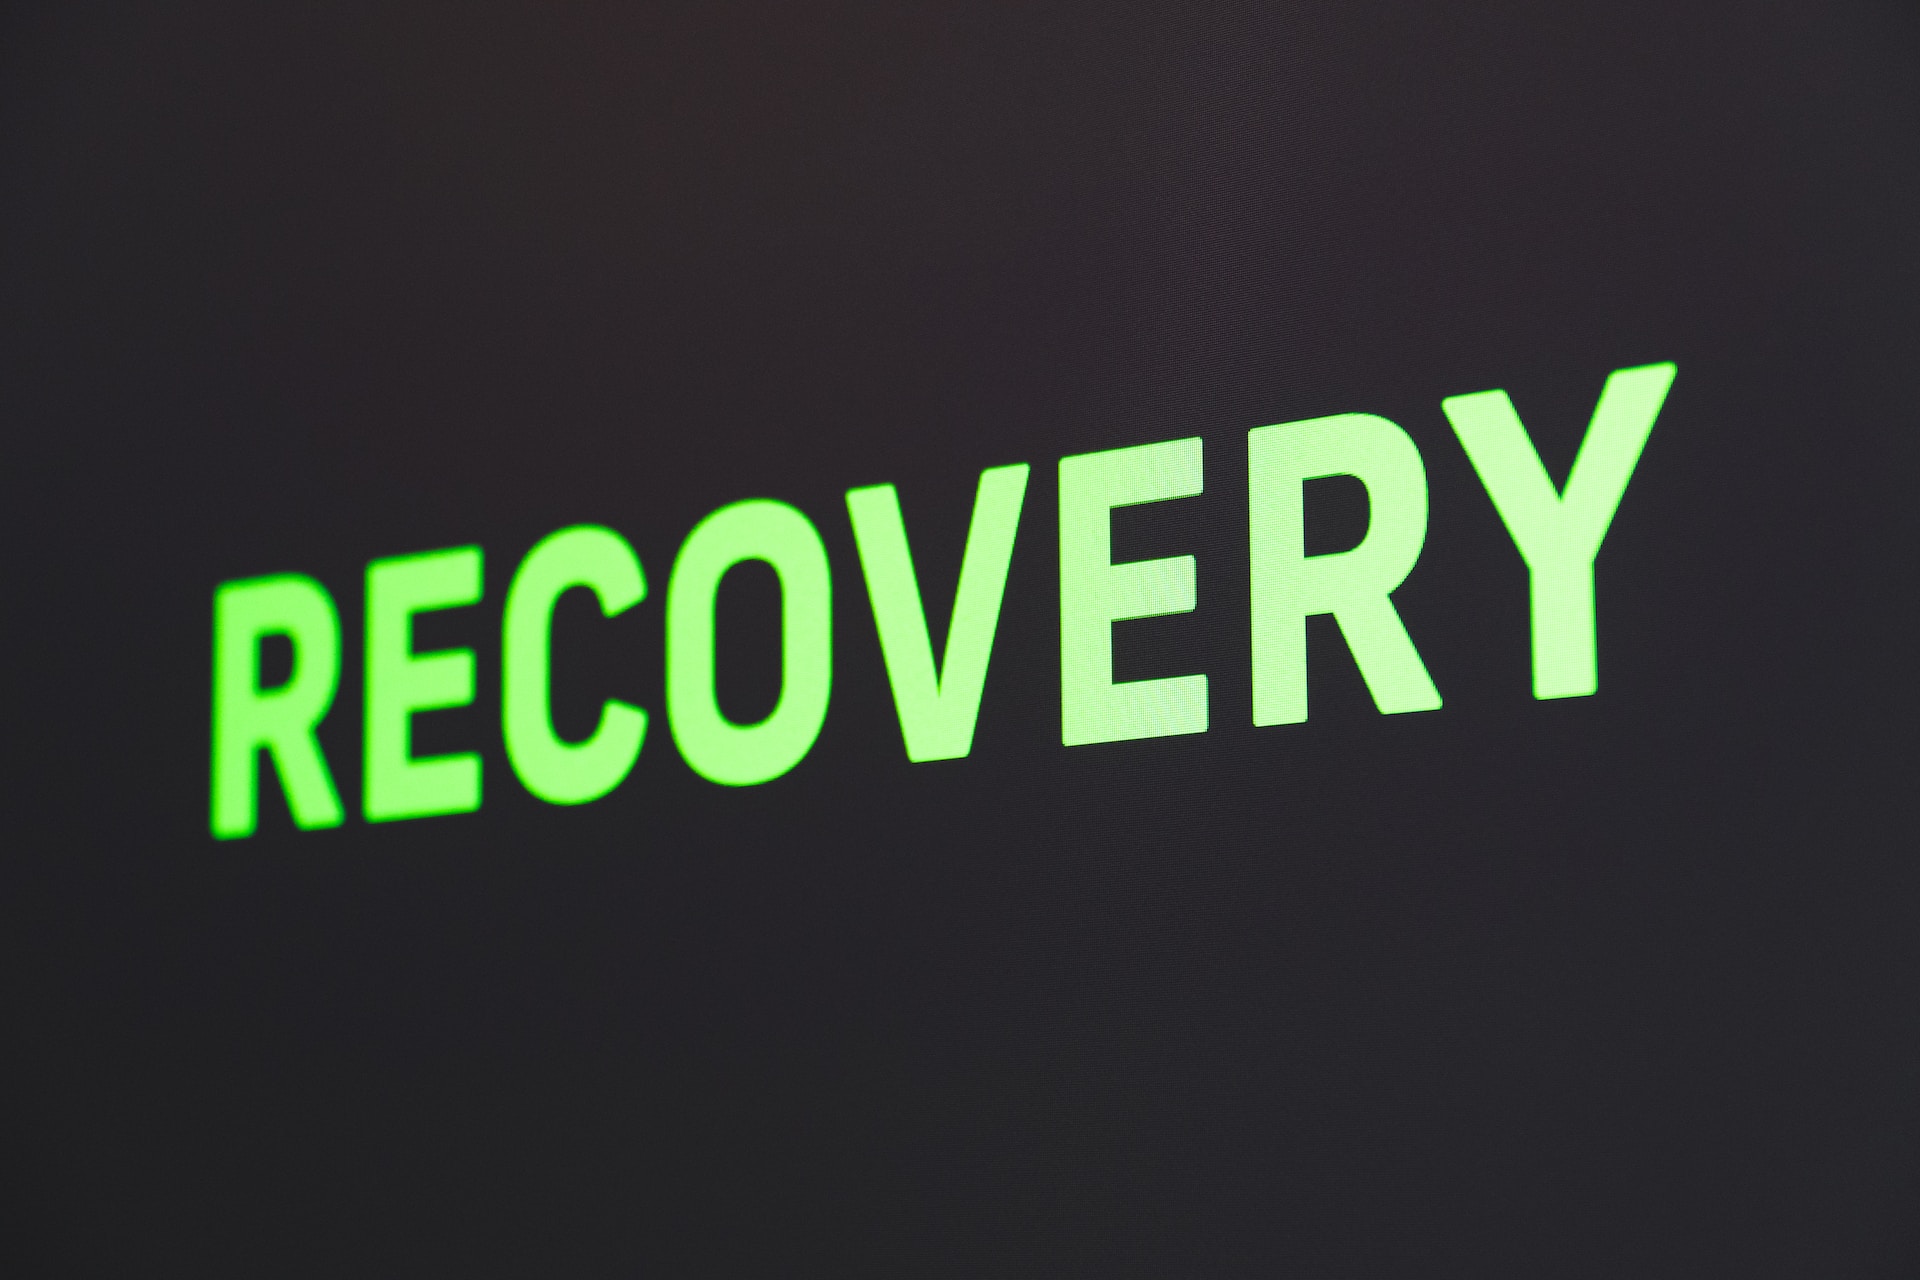 "Recovery" in green on a black background